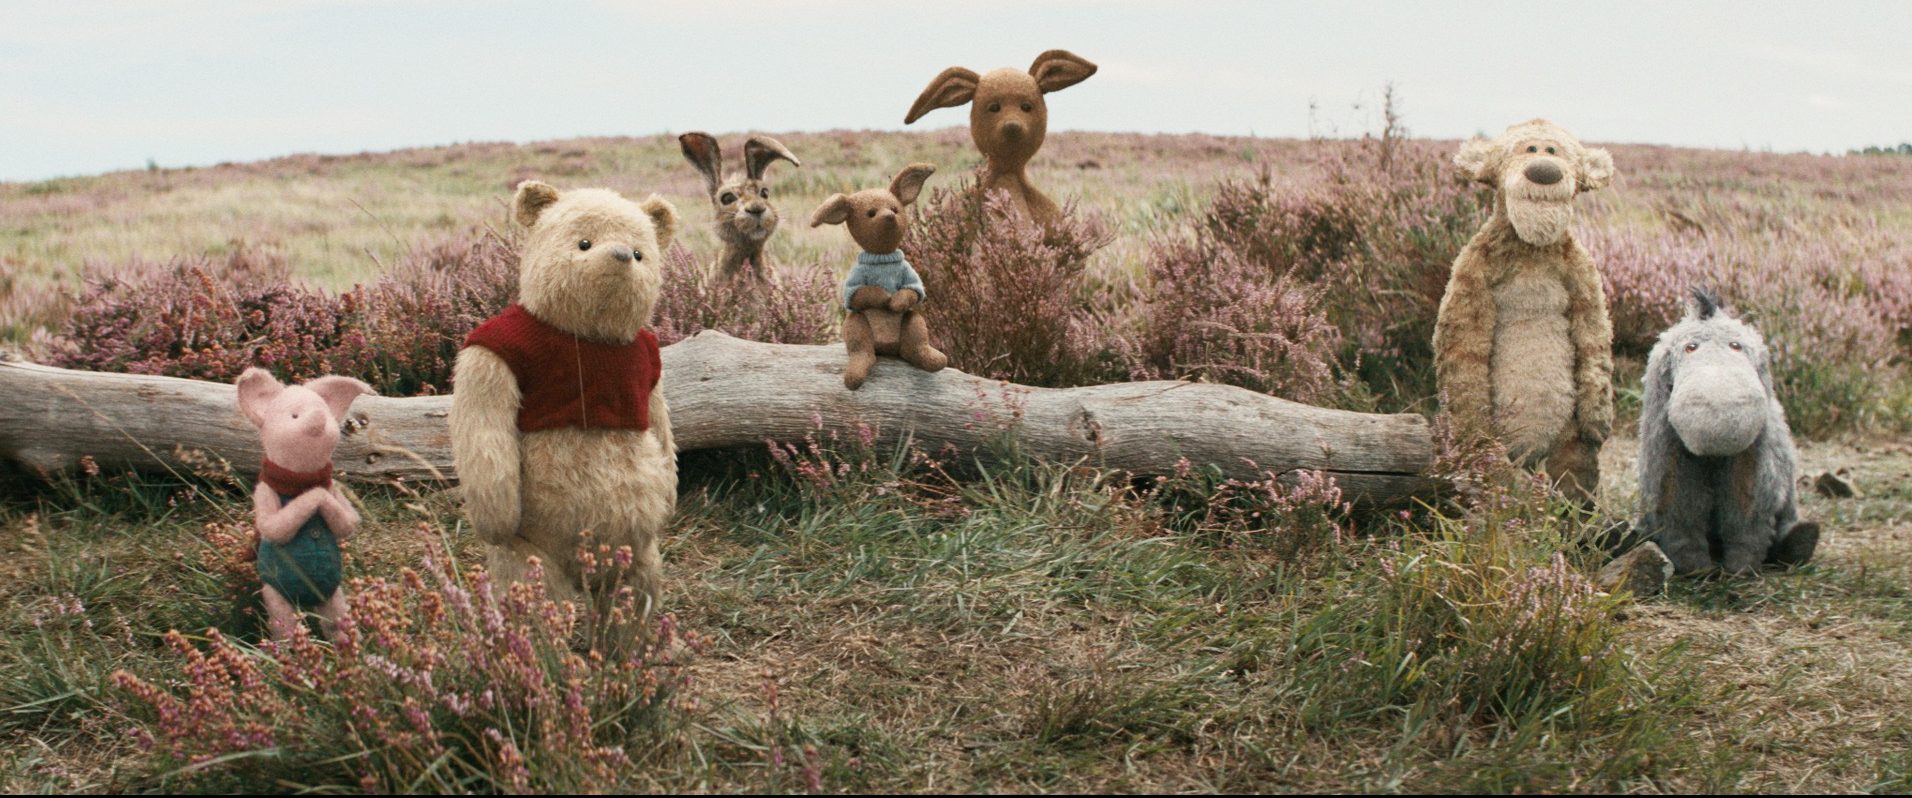 THE GANG IS BACK. Piglet, Pooh, Rabbit, Roo, Kanga, Tigger and Eeyore are back in the movies. 